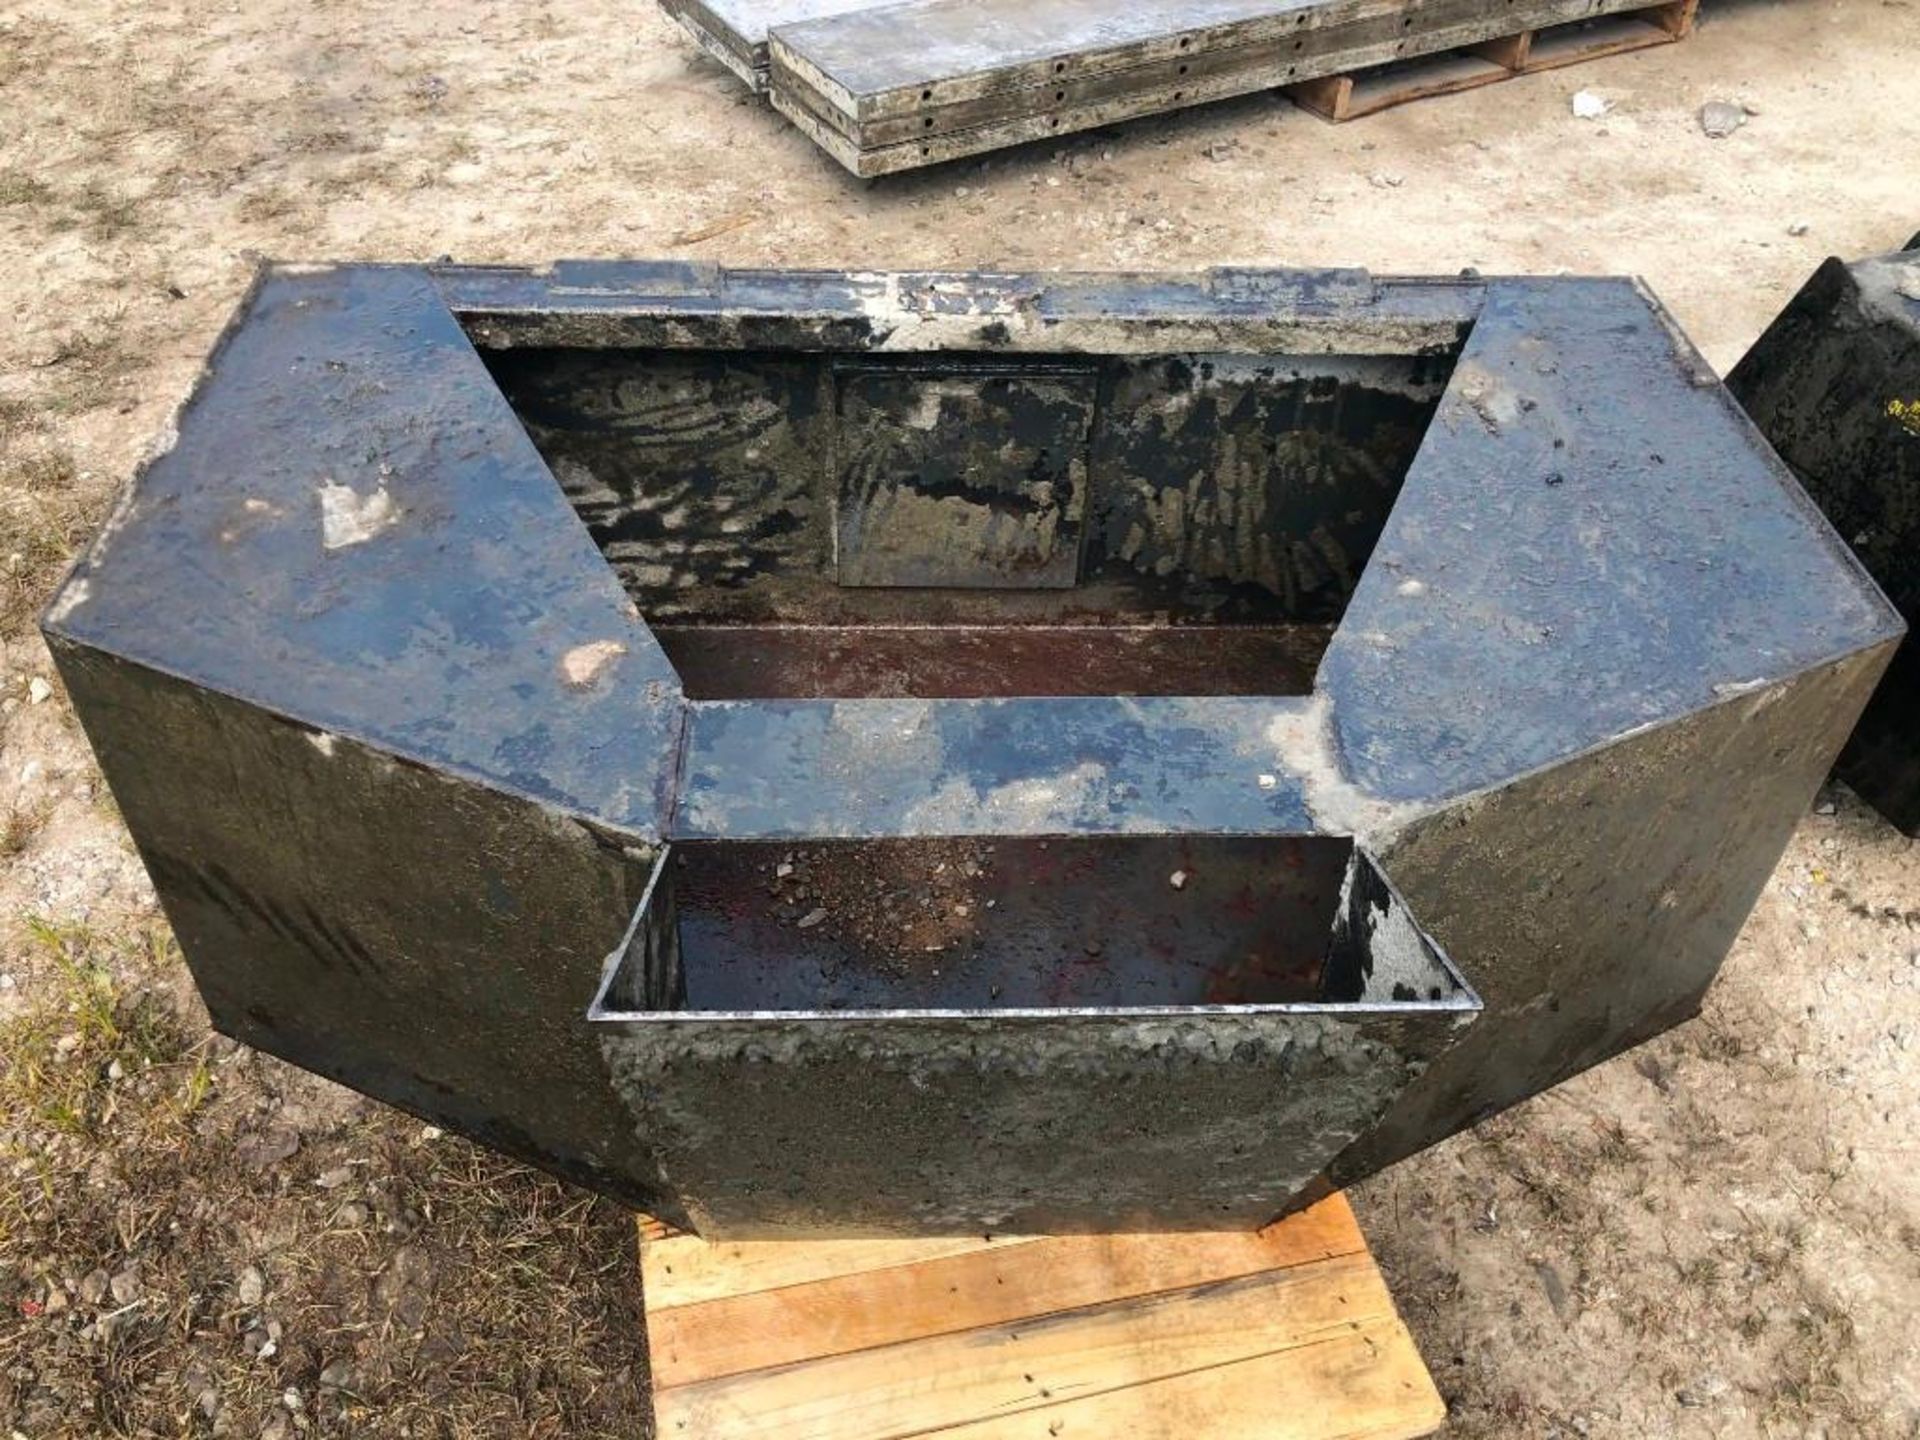 Skidloader Concrete Chute Bucket. Located at 301 E Henry Street, Mt. Pleasant, IA 52641. - Image 2 of 2